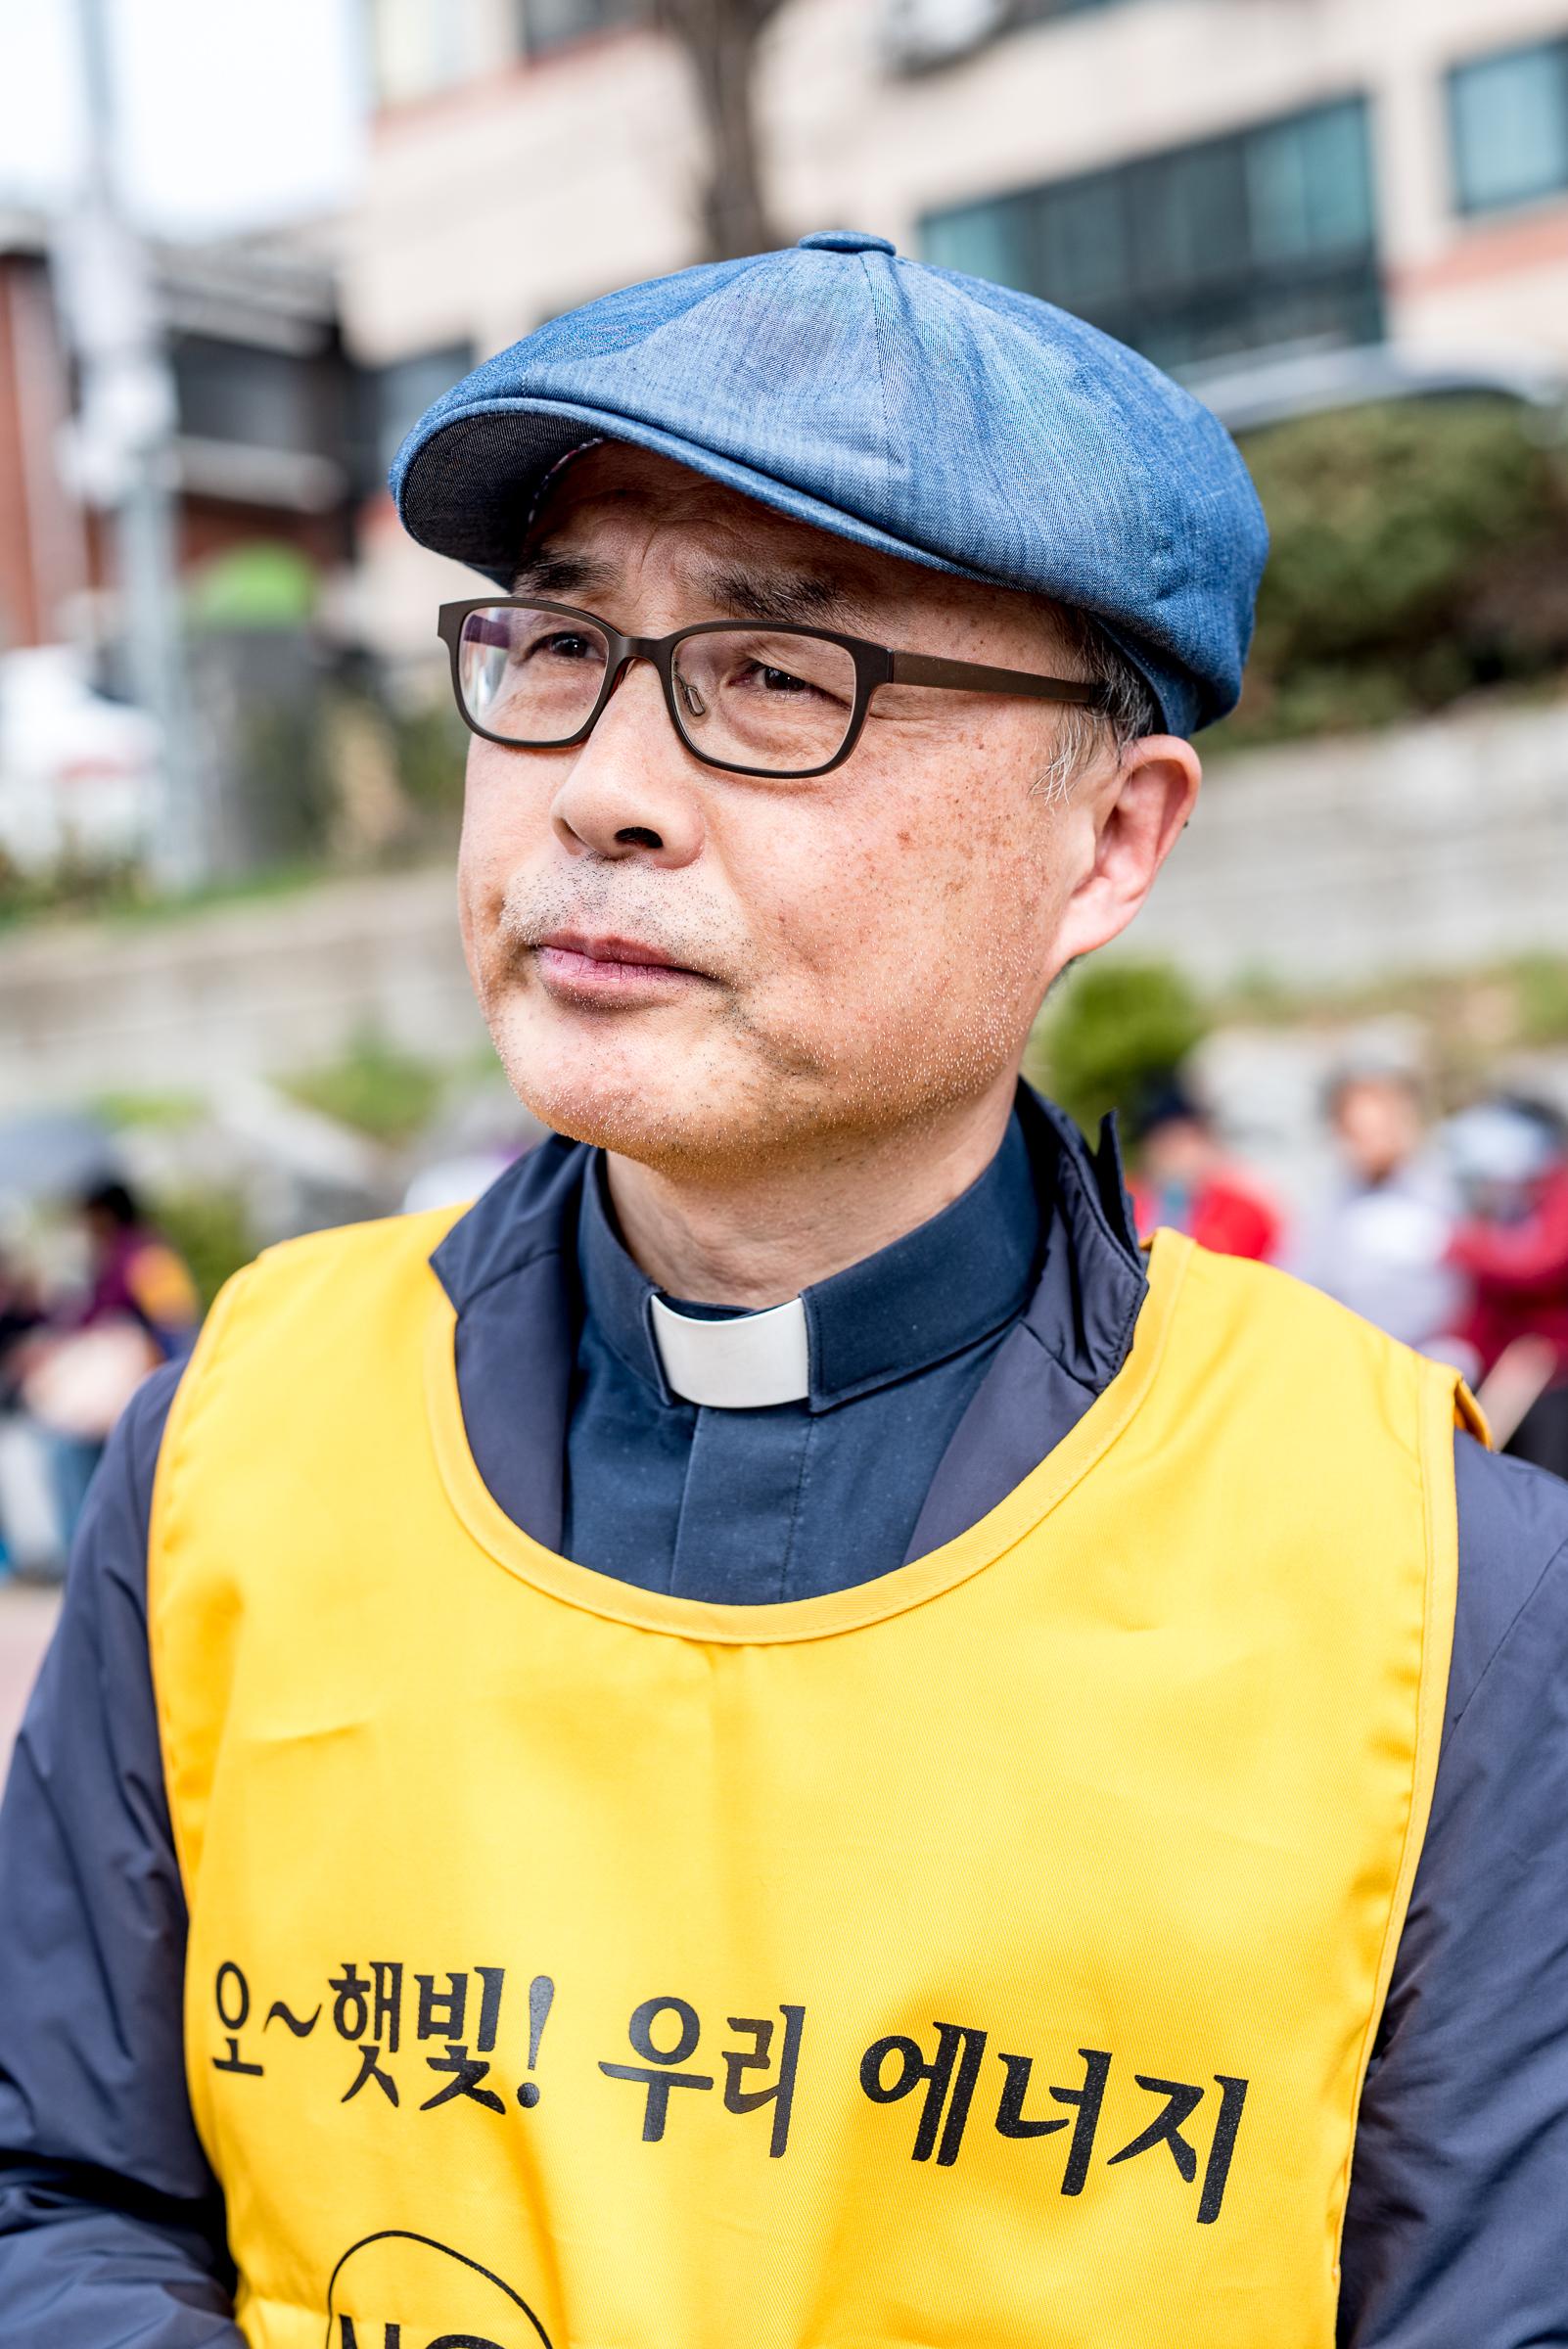 Speaking at a recent anti-nuclear protest, Father Cho Hyun-chul of Sogang University says, 